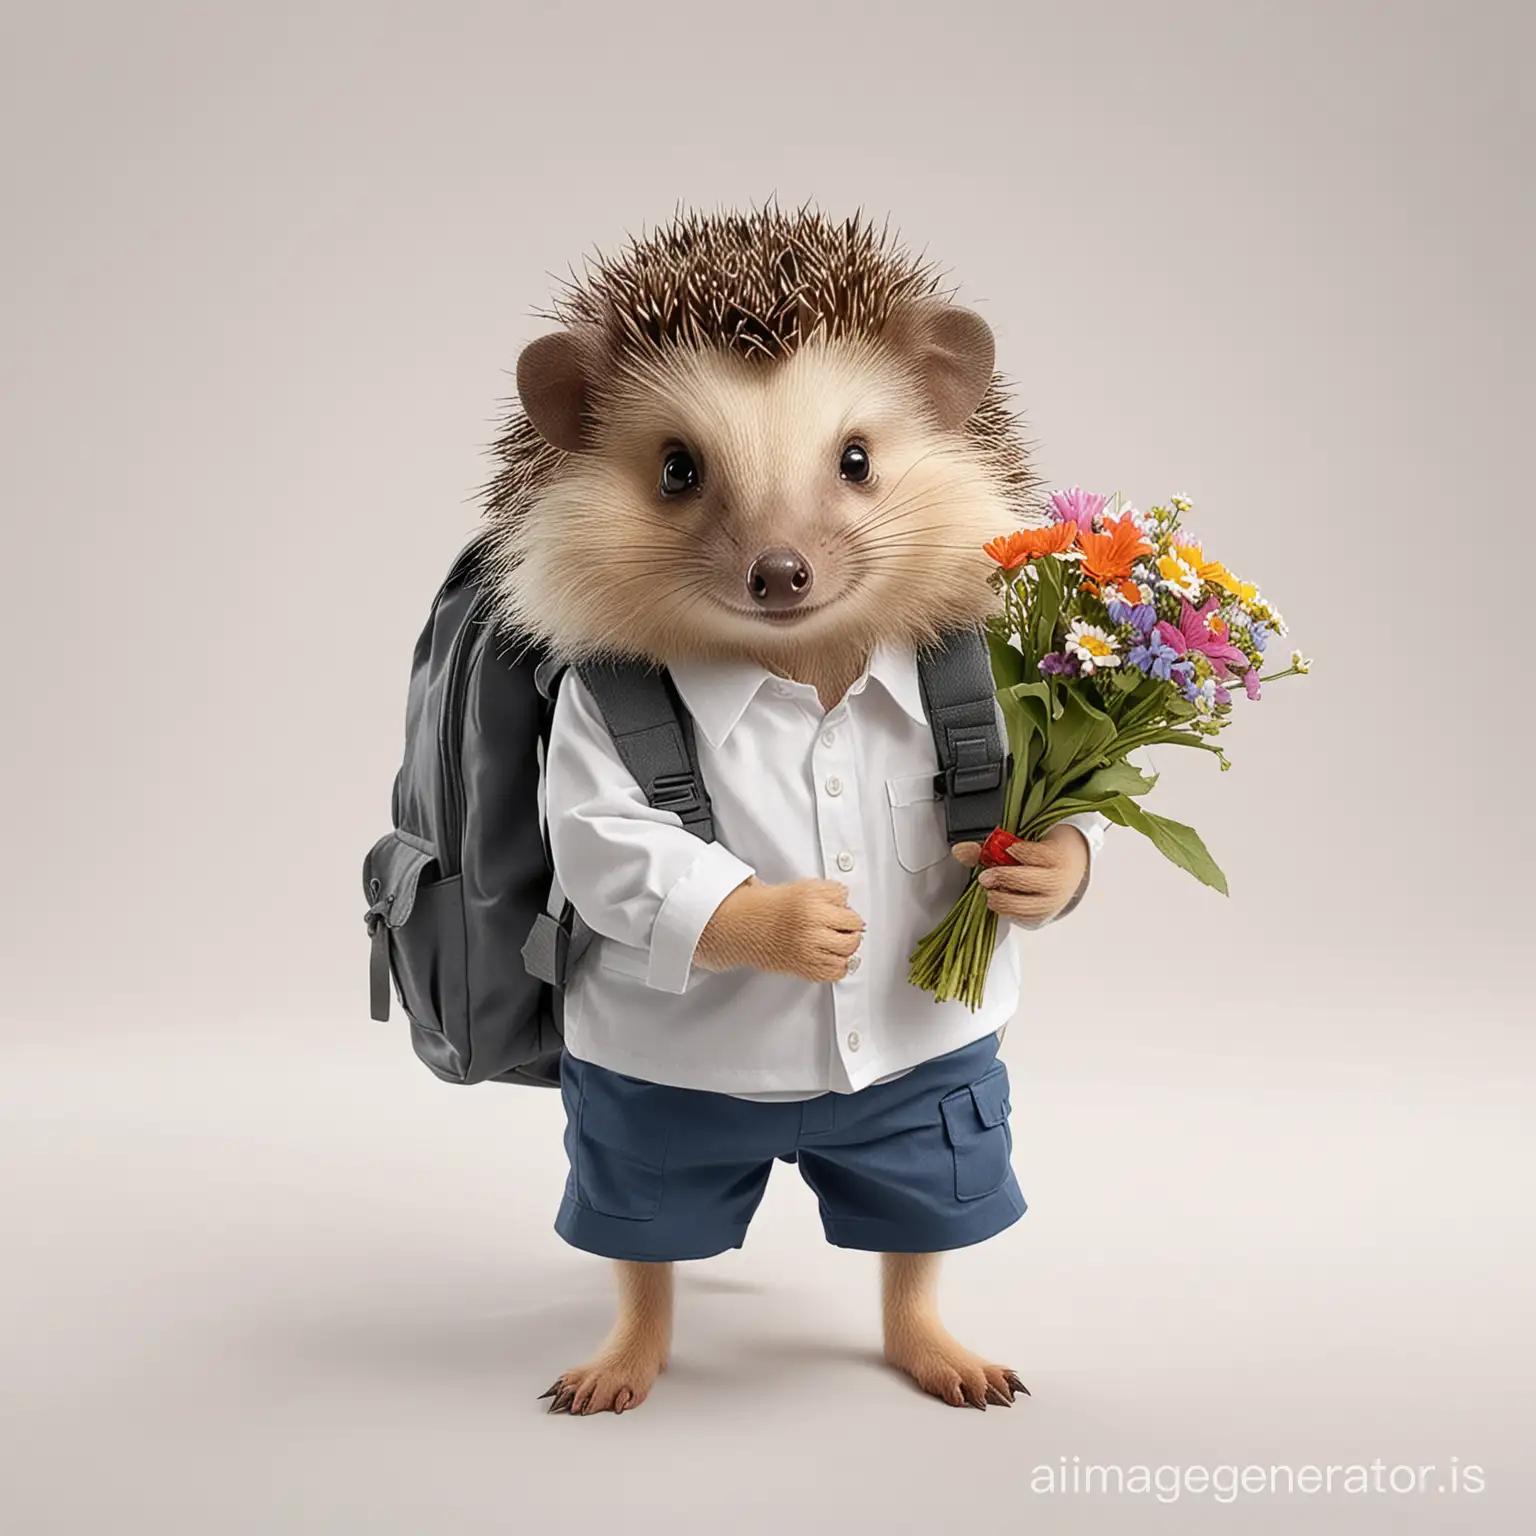 Adorable-Hedgehog-Student-Preparing-for-School-with-Bouquet-and-Backpack-on-White-Background